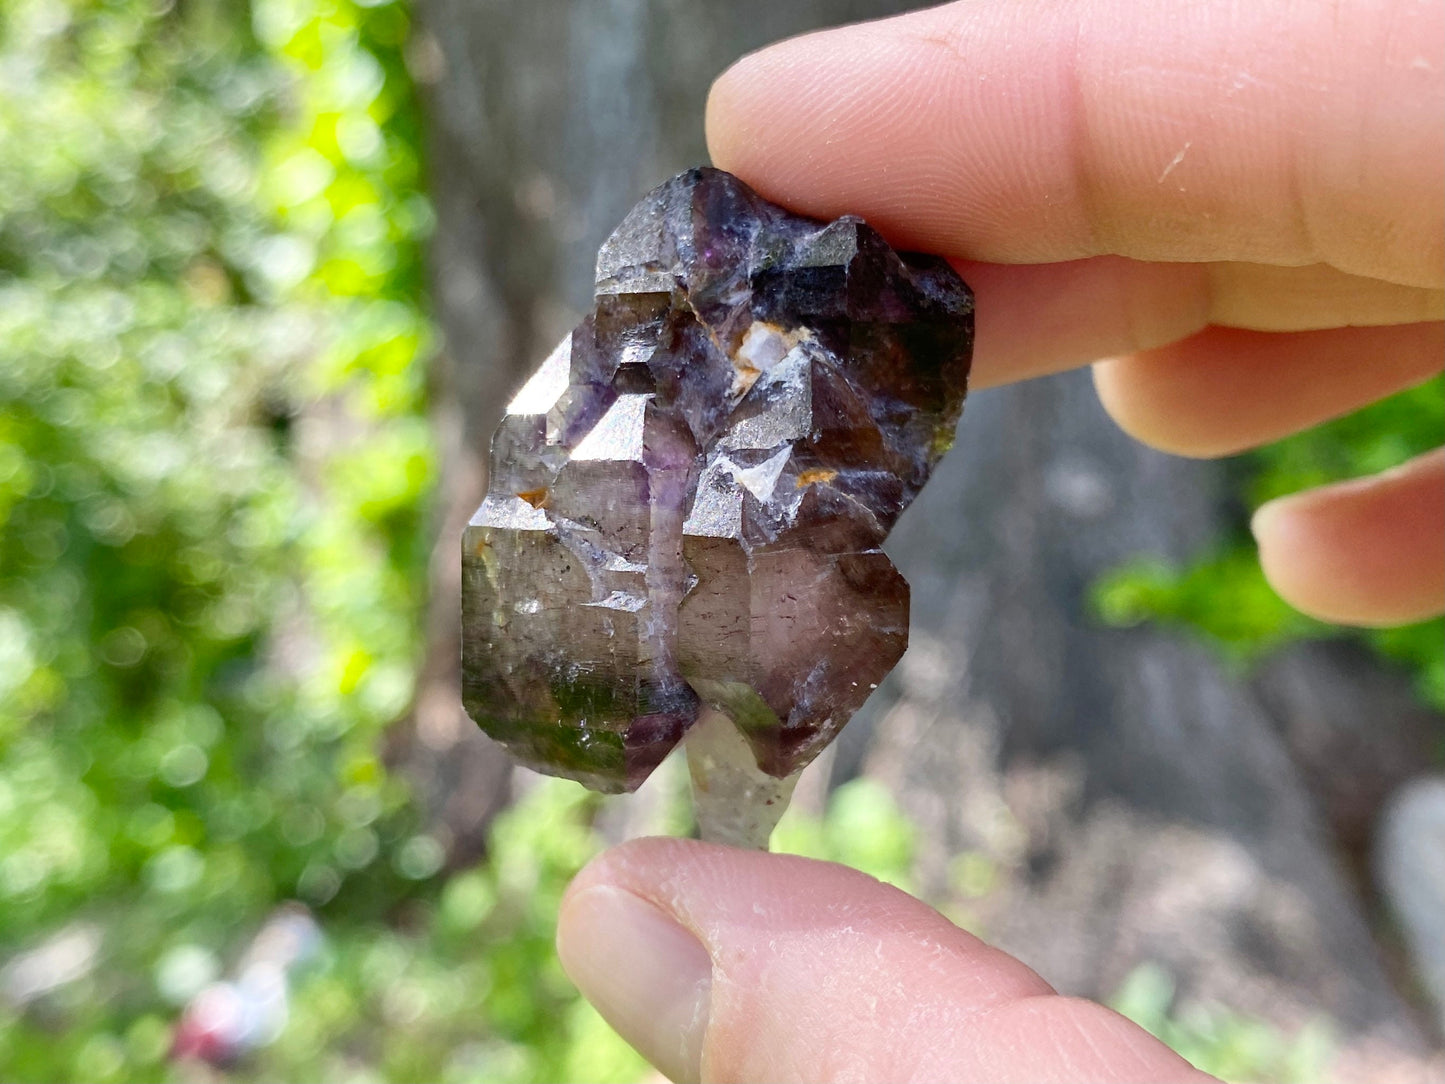 Elestial Shangaan Amethyst Crystal ~ Smoky Quartz and Amethyst with Harlequin Red Hematite inclusions  - Double Terminated Scepter